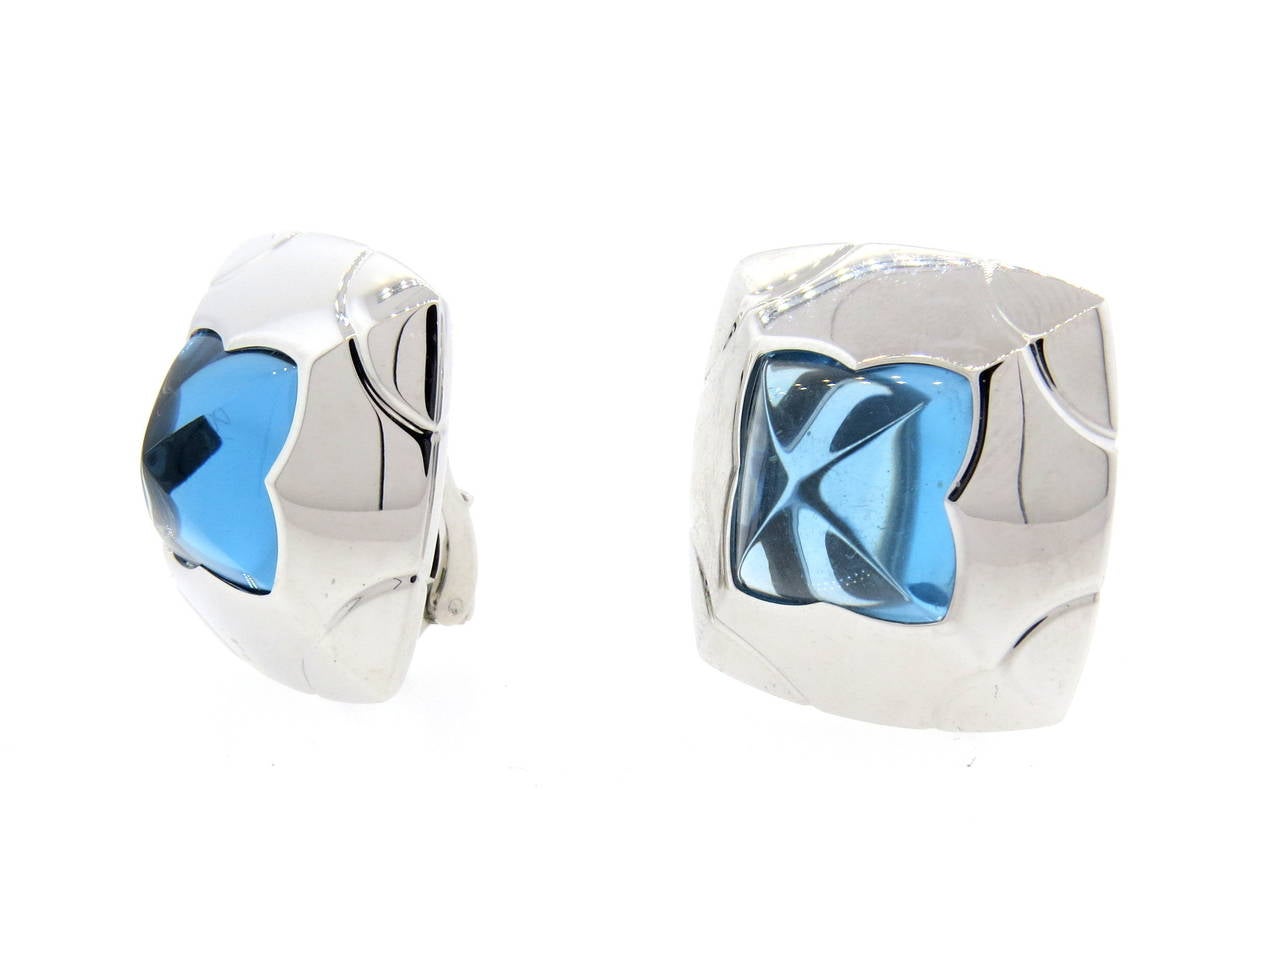 A pair of 18k white gold earrings set with blue topaz from the Piramide collection by Bulgari.  The earrings measure 25mm x 25mm and weigh 34.1 grams.